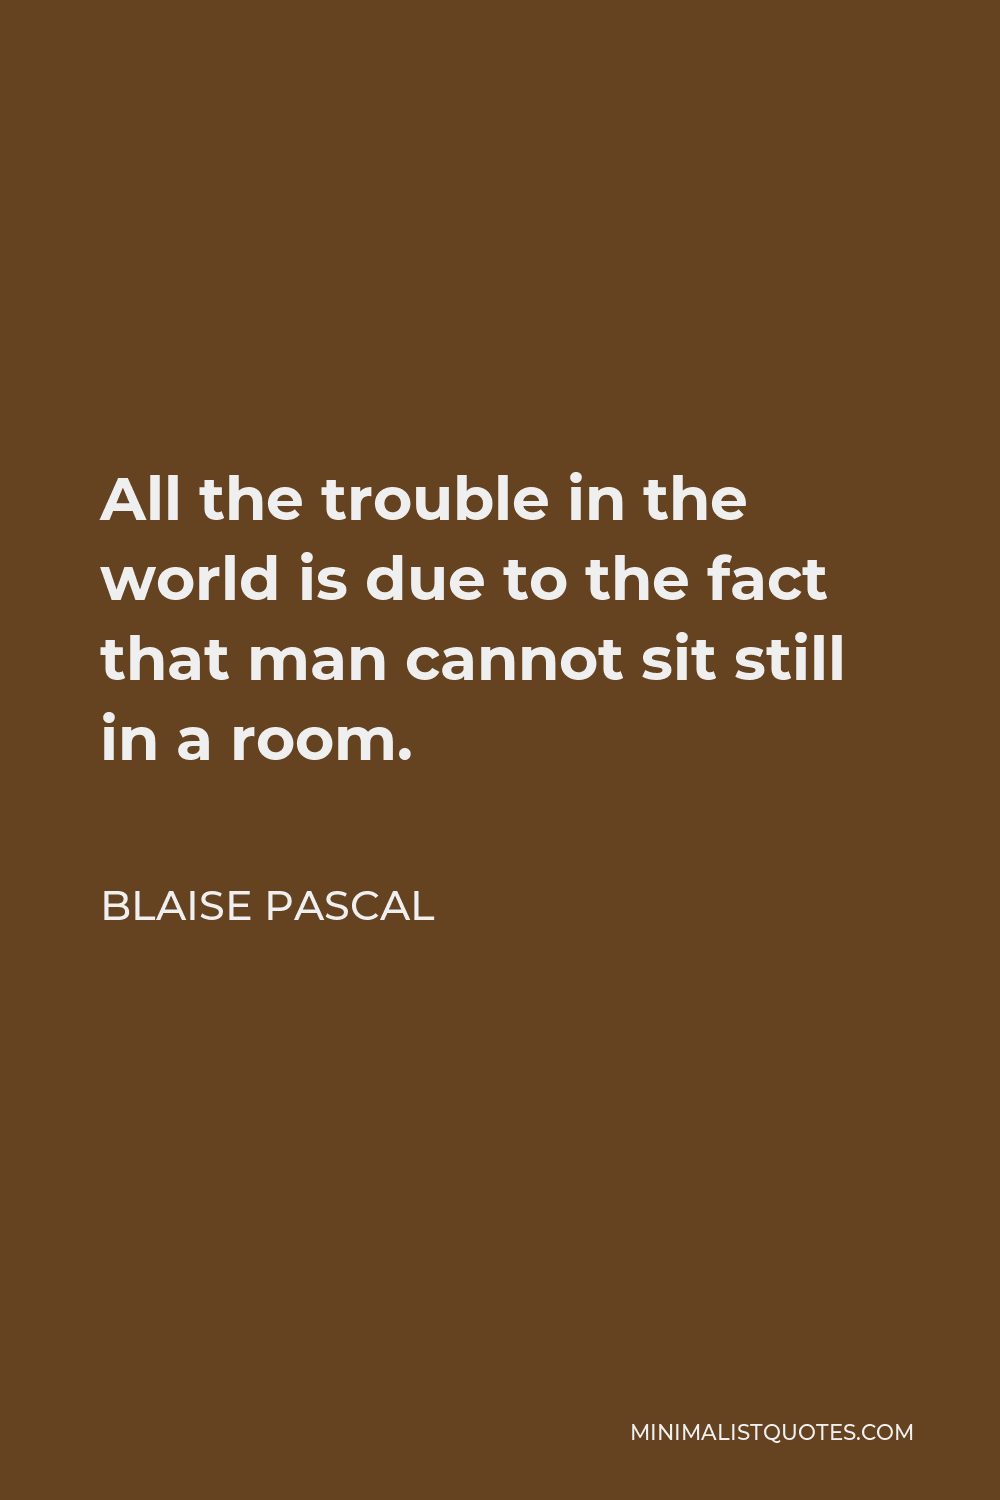 Blaise Pascal Quote - All the trouble in the world is due to the fact that man cannot sit still in a room.